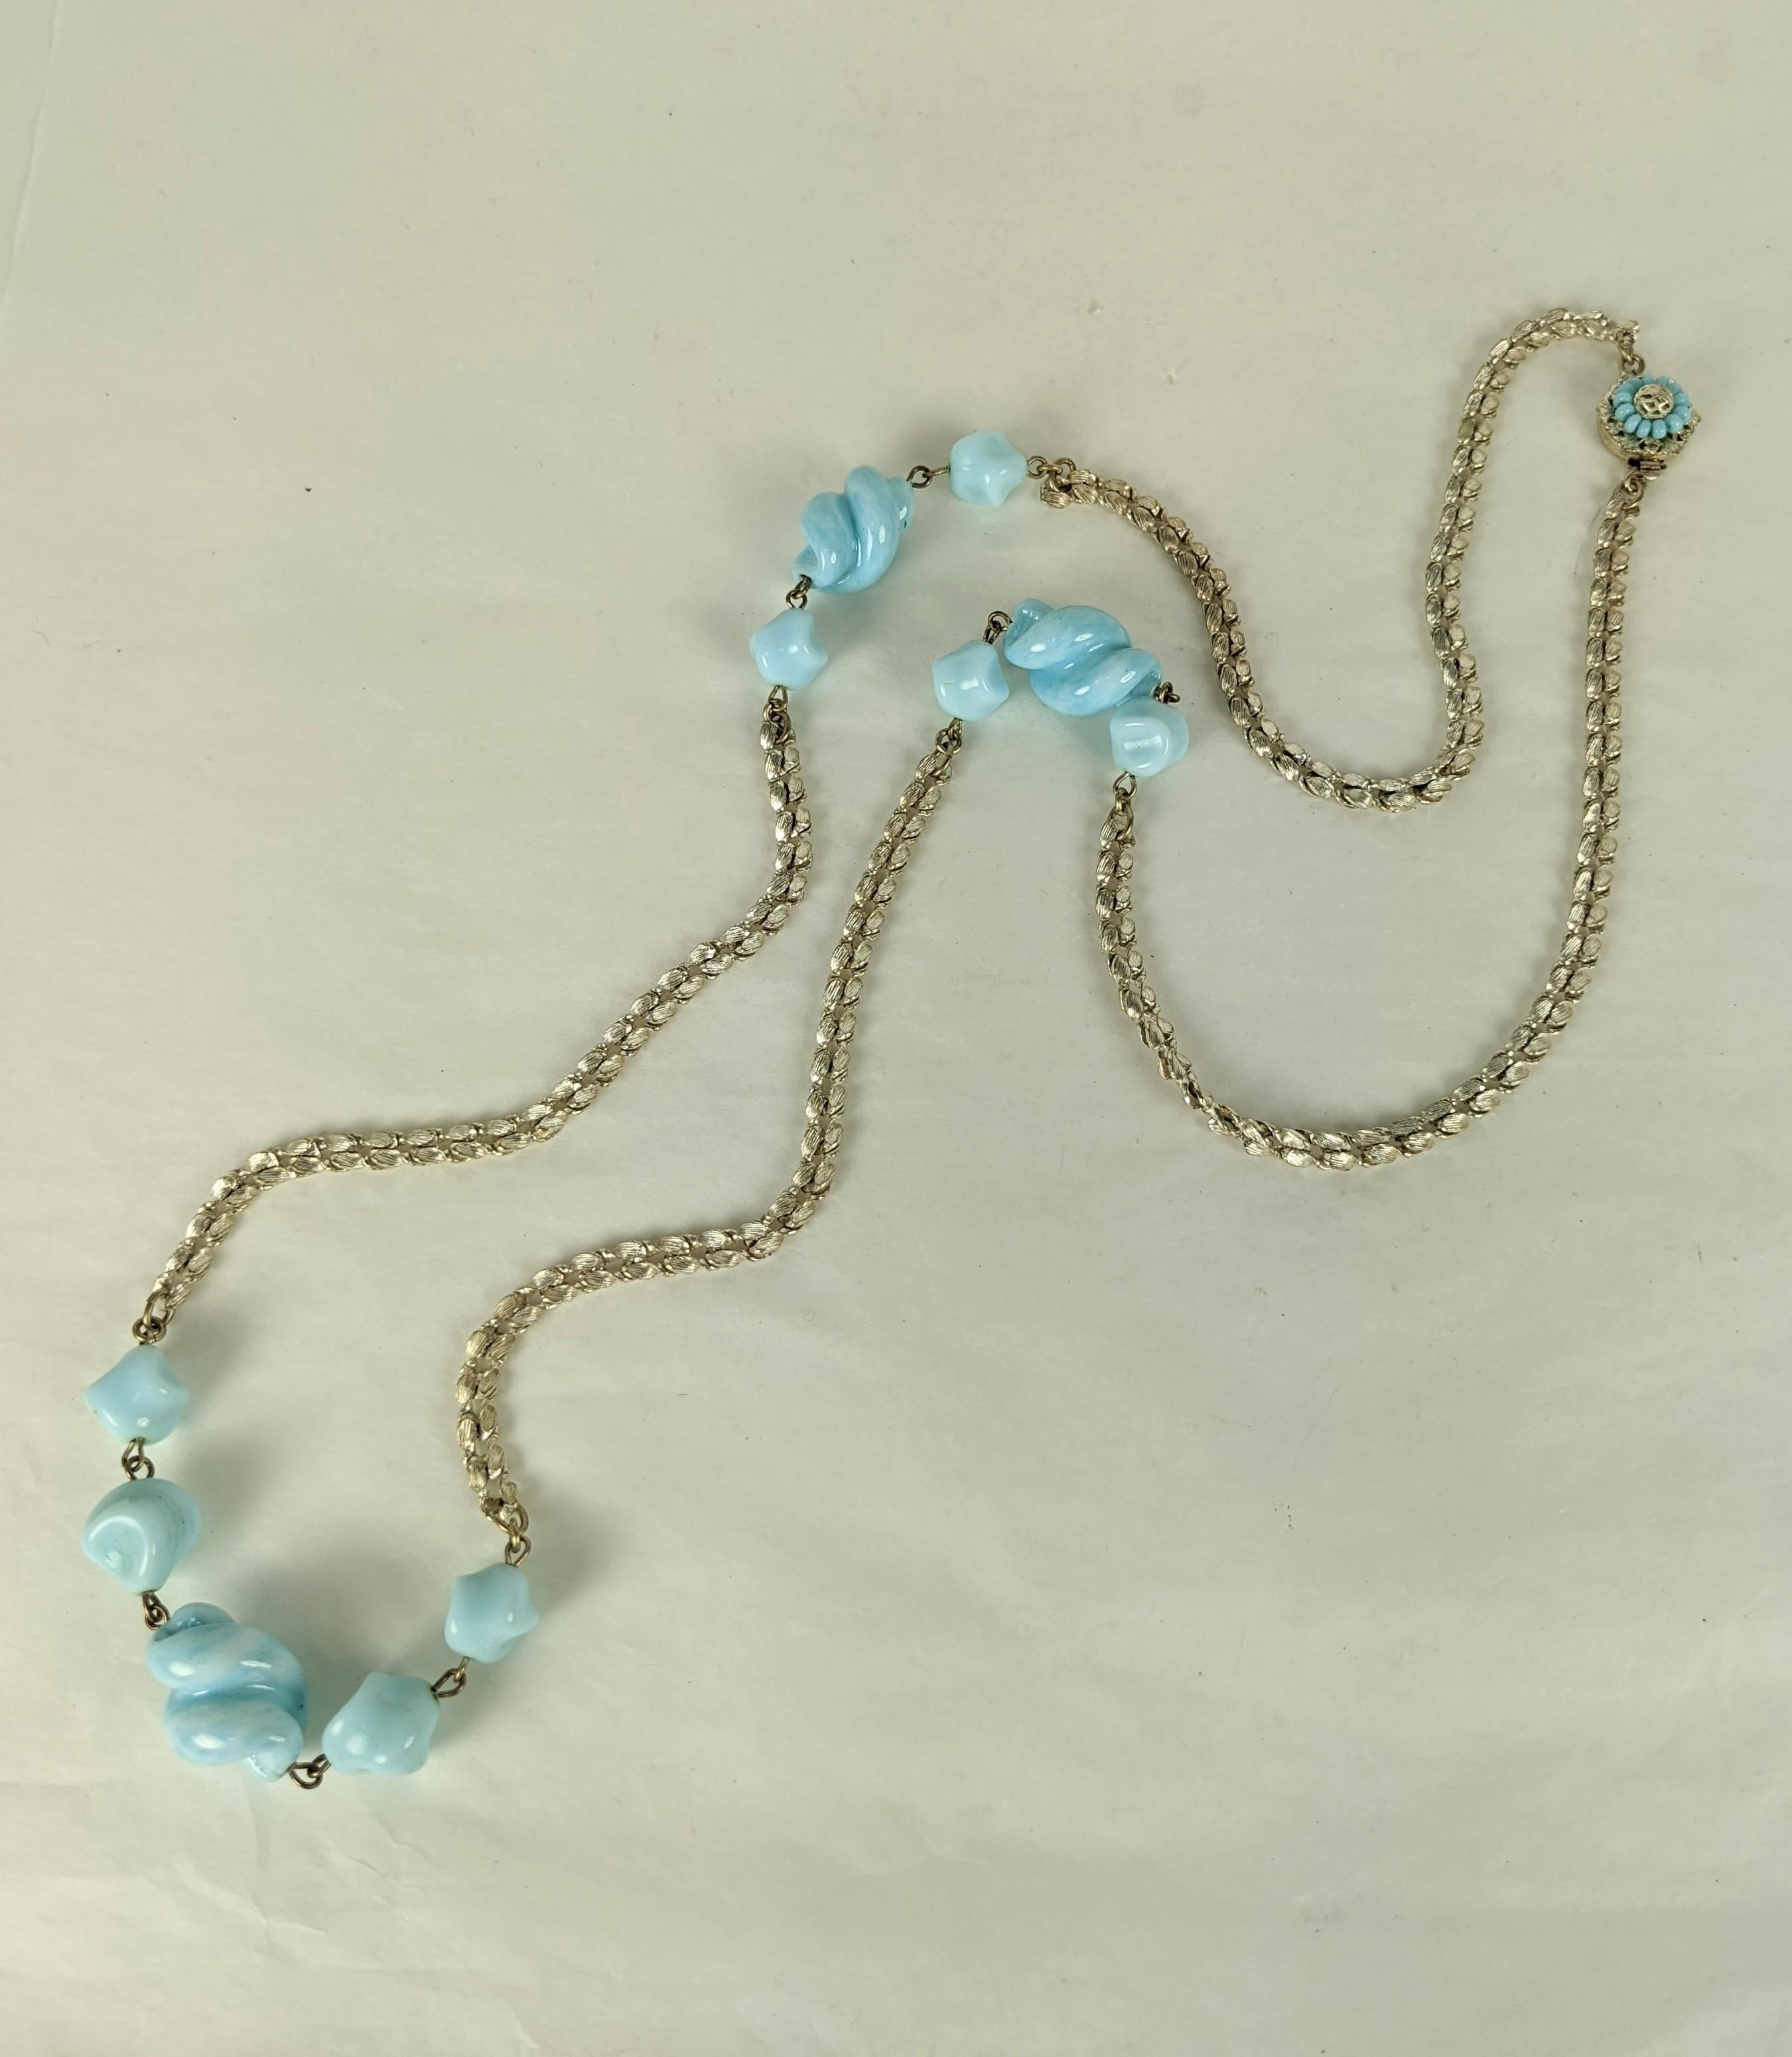 Miriam Haskell pale turquoise blue pate de verre hand made cork screw bead sautoir. The textured woven chain of silver plate. Signature Miriam Haskell hexagon clasp of hand sewn turquoise seed beads and silvered filigrees. Excellent Condition.